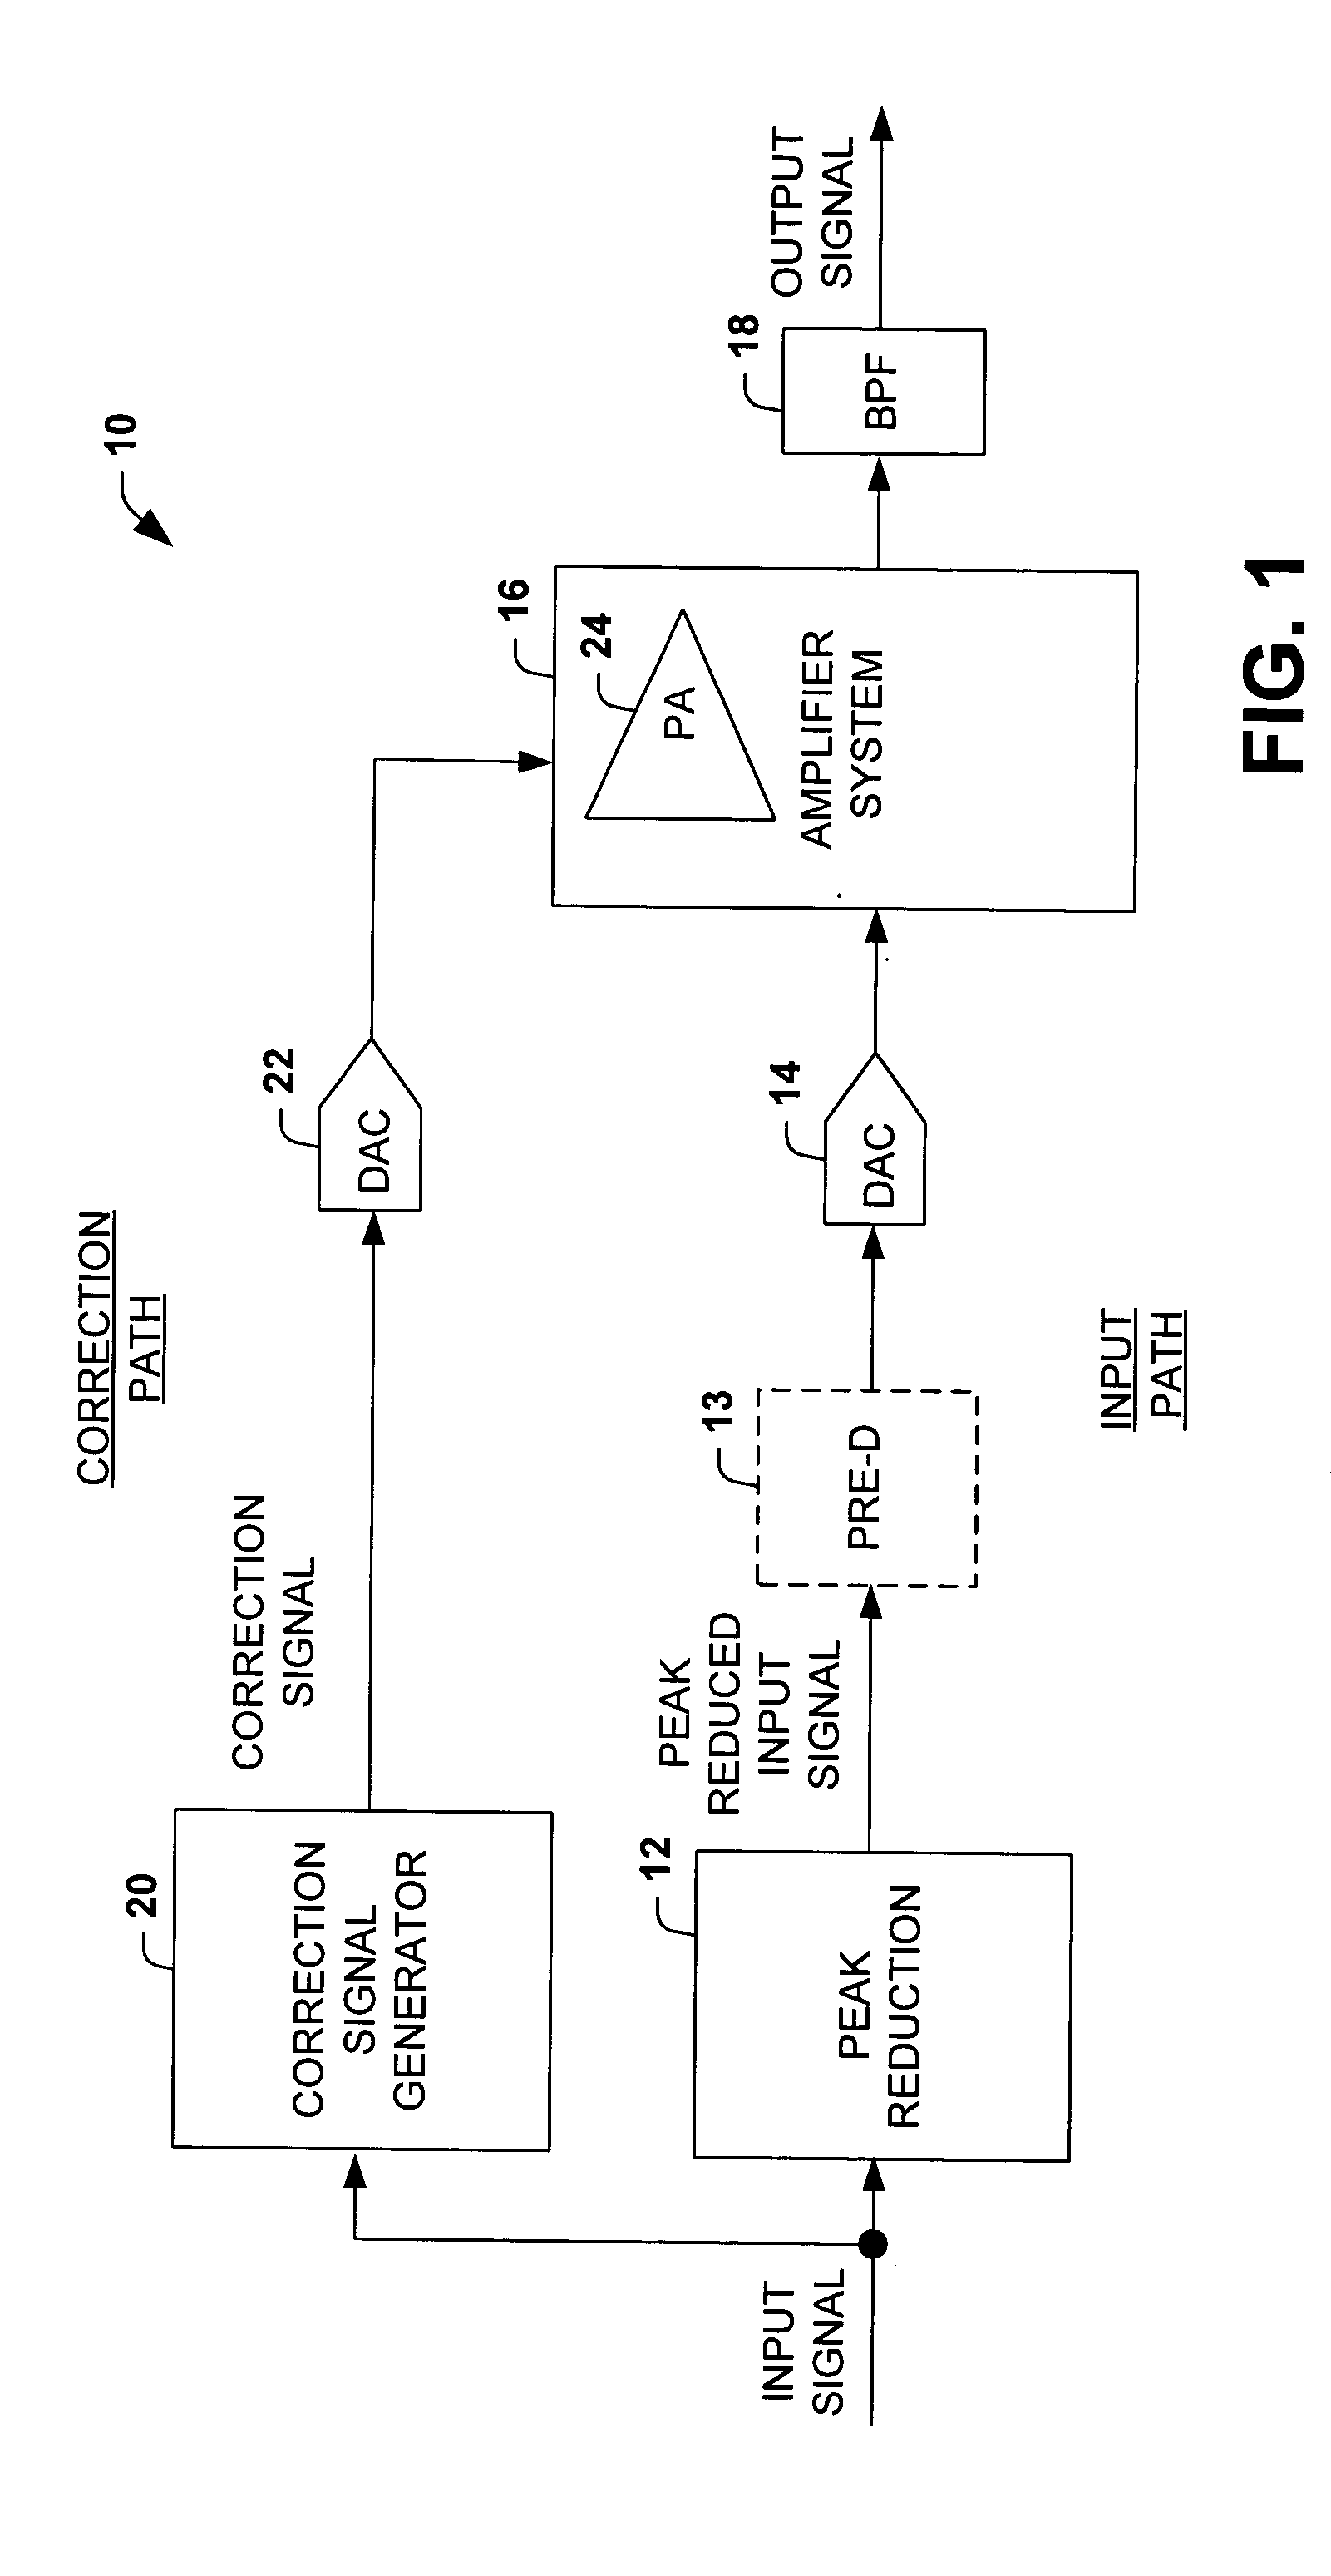 System and method for reducing dynamic range and improving linearity in an amplication system